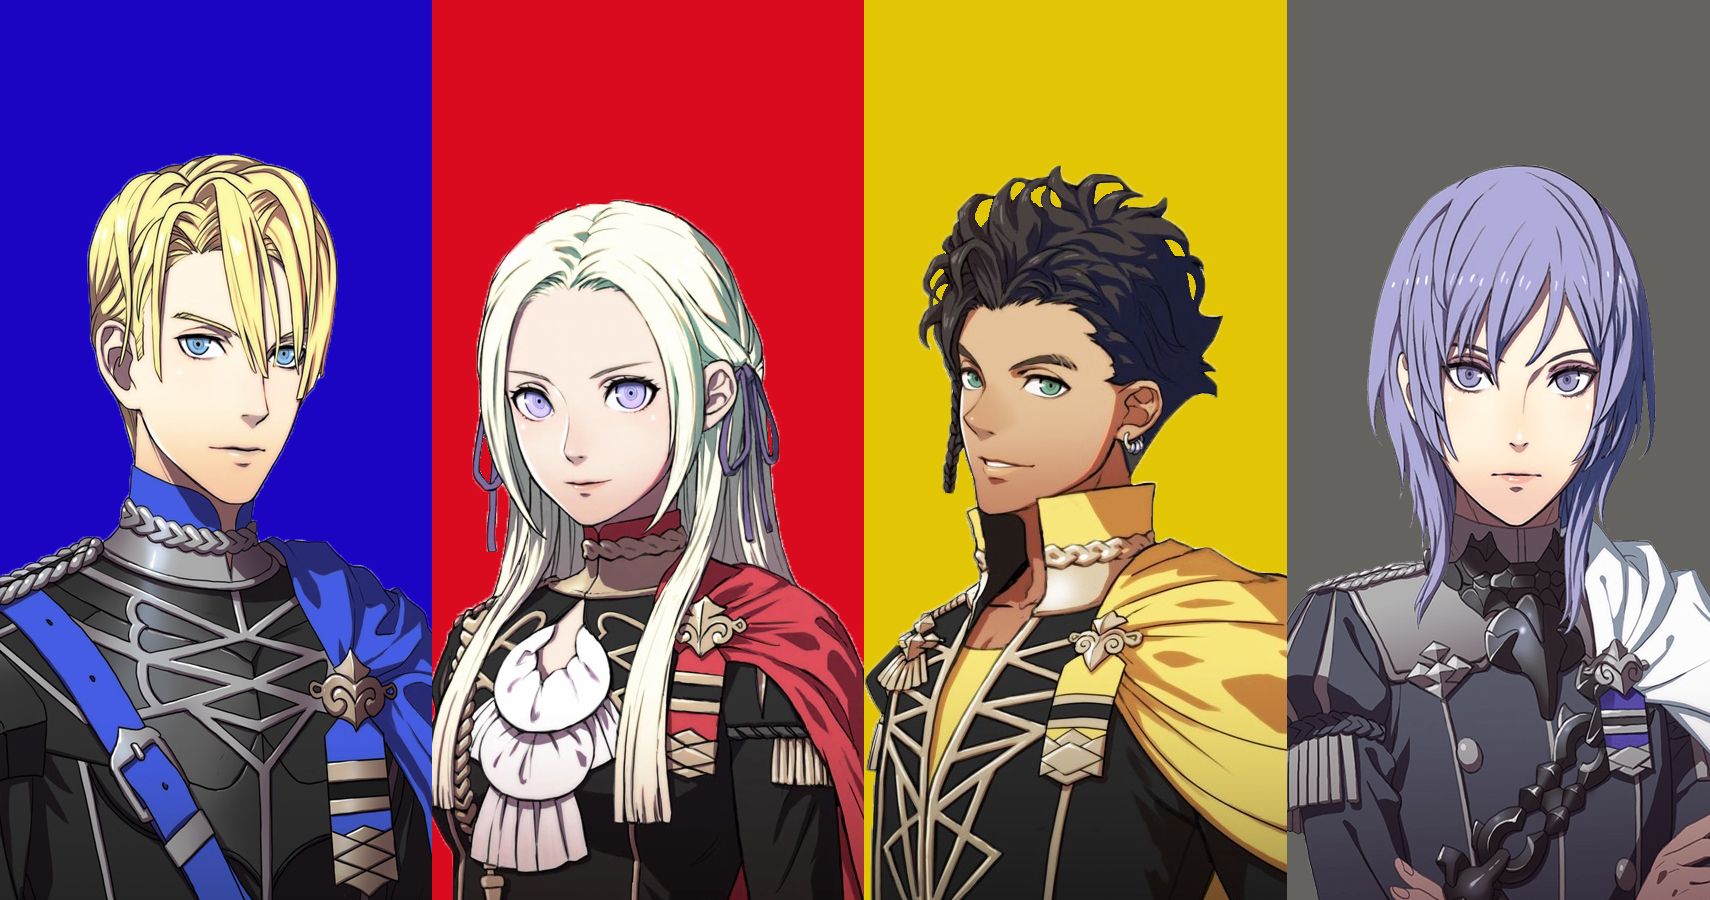 three-houses-which-fire-emblem-house-are-you-based-on-your-zodiac-type